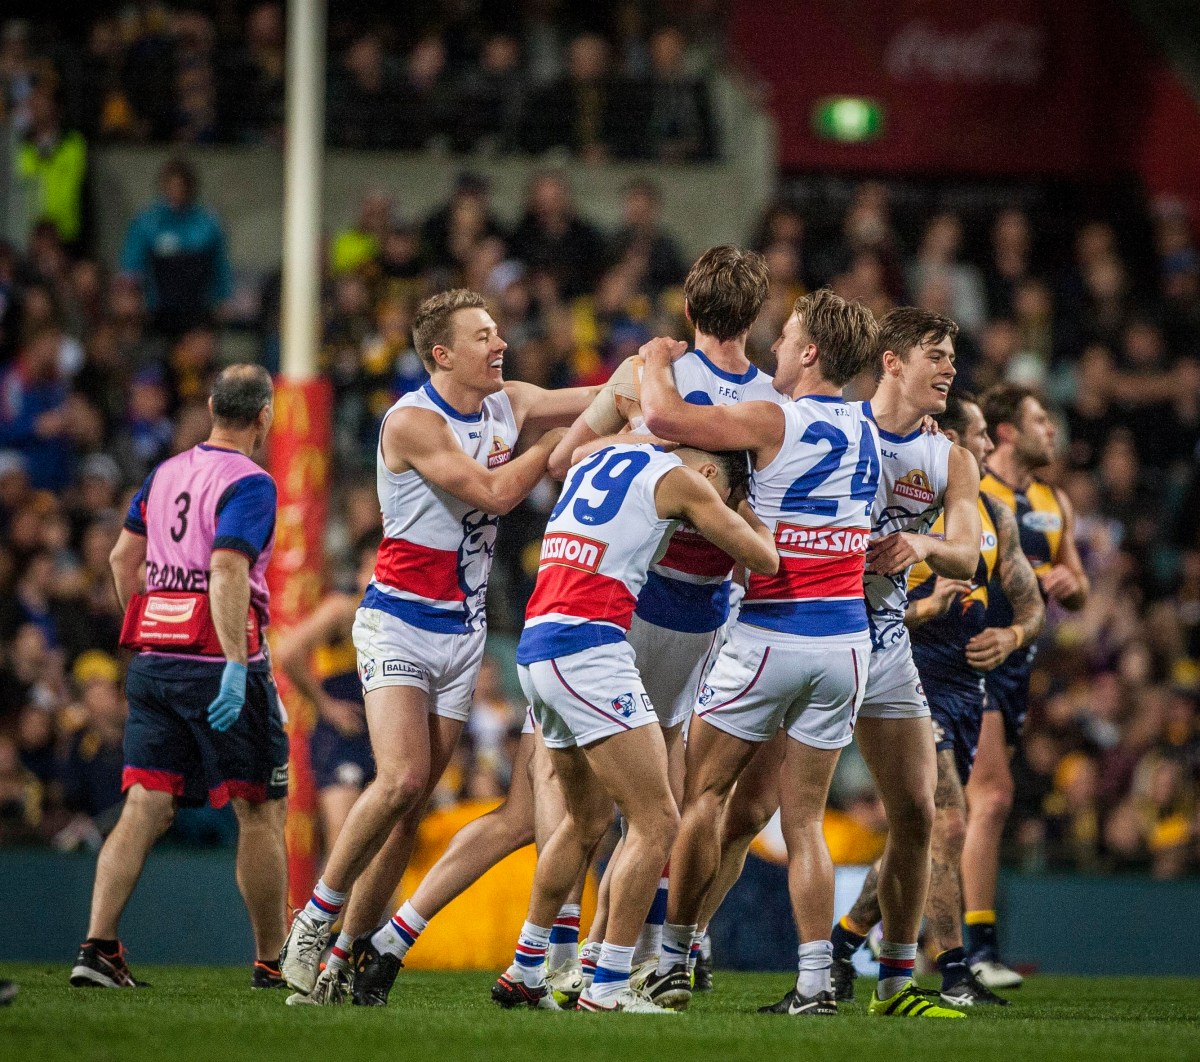 Bulldogs players celebrate a goal during the AFL Elimination Final between the West Coast Eagles and the Western Bulldogs at Domain Stadium Stadium in Perth, Thursday, Sept. 8, 2016. (AAP Image/Tony McDonough) NO ARCHIVING, EDITORIAL USE ONLY